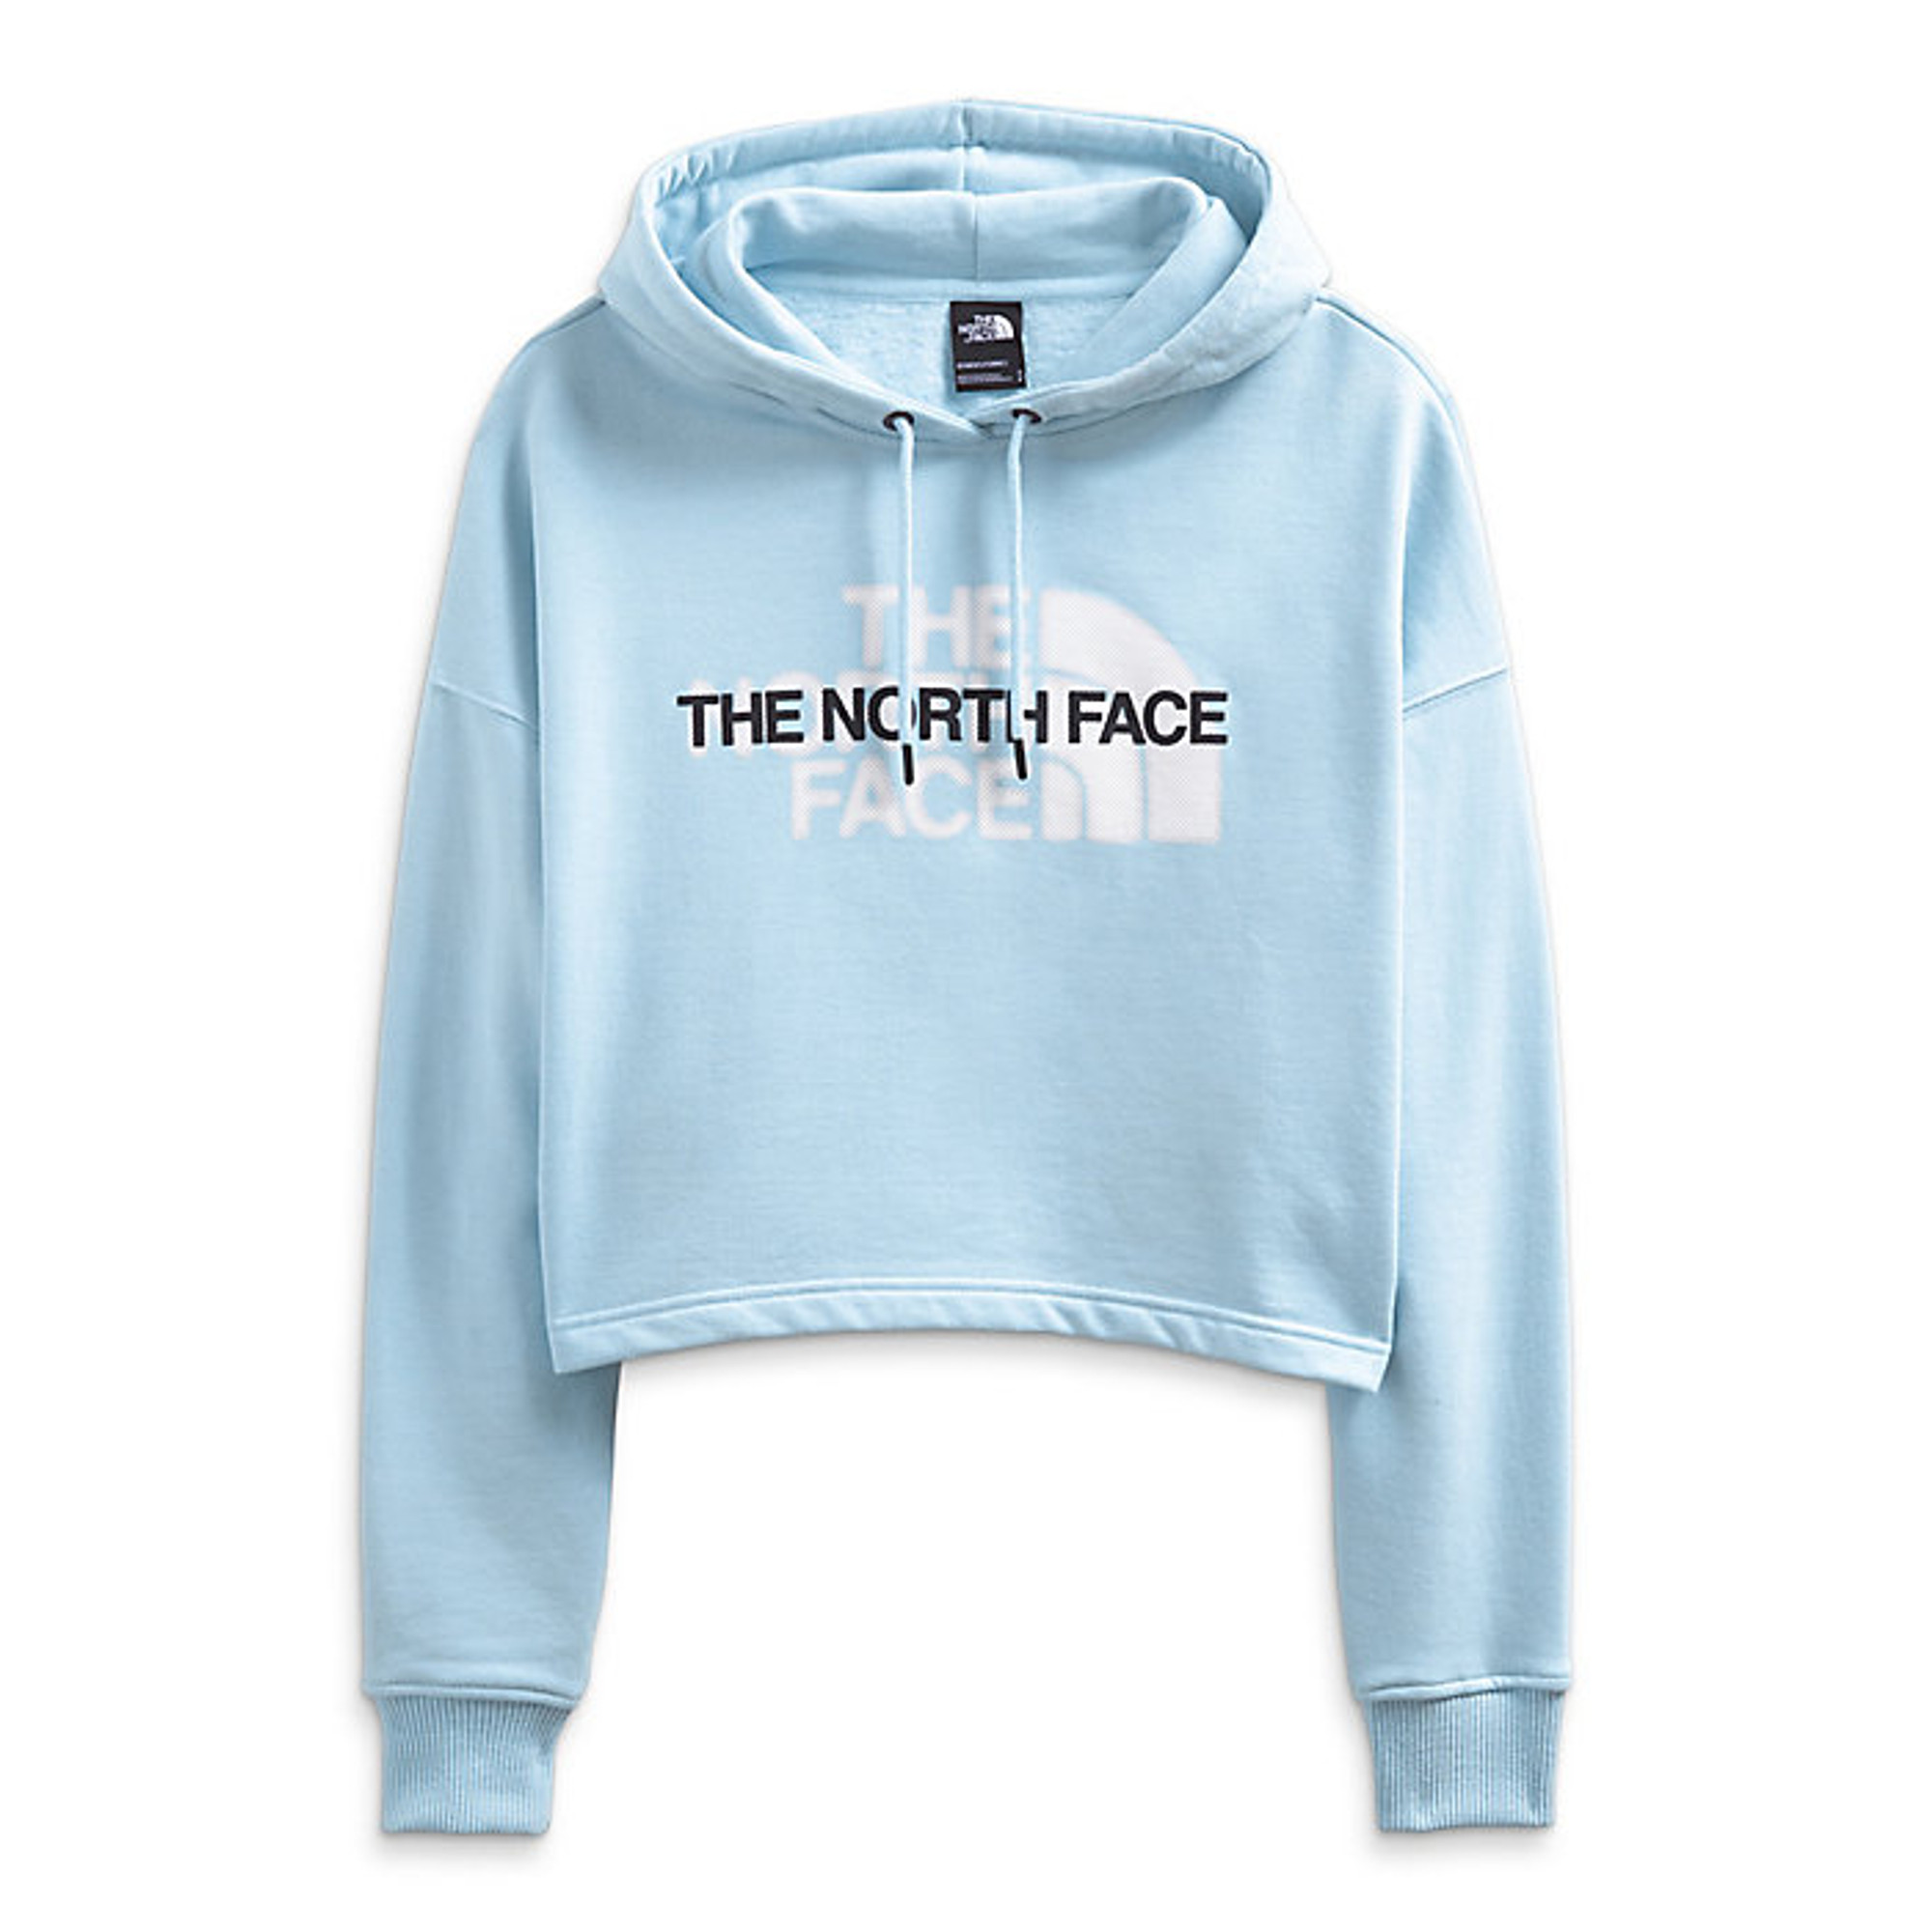 The North Face Women's Coordinates Hoodie - High Mountain Sports